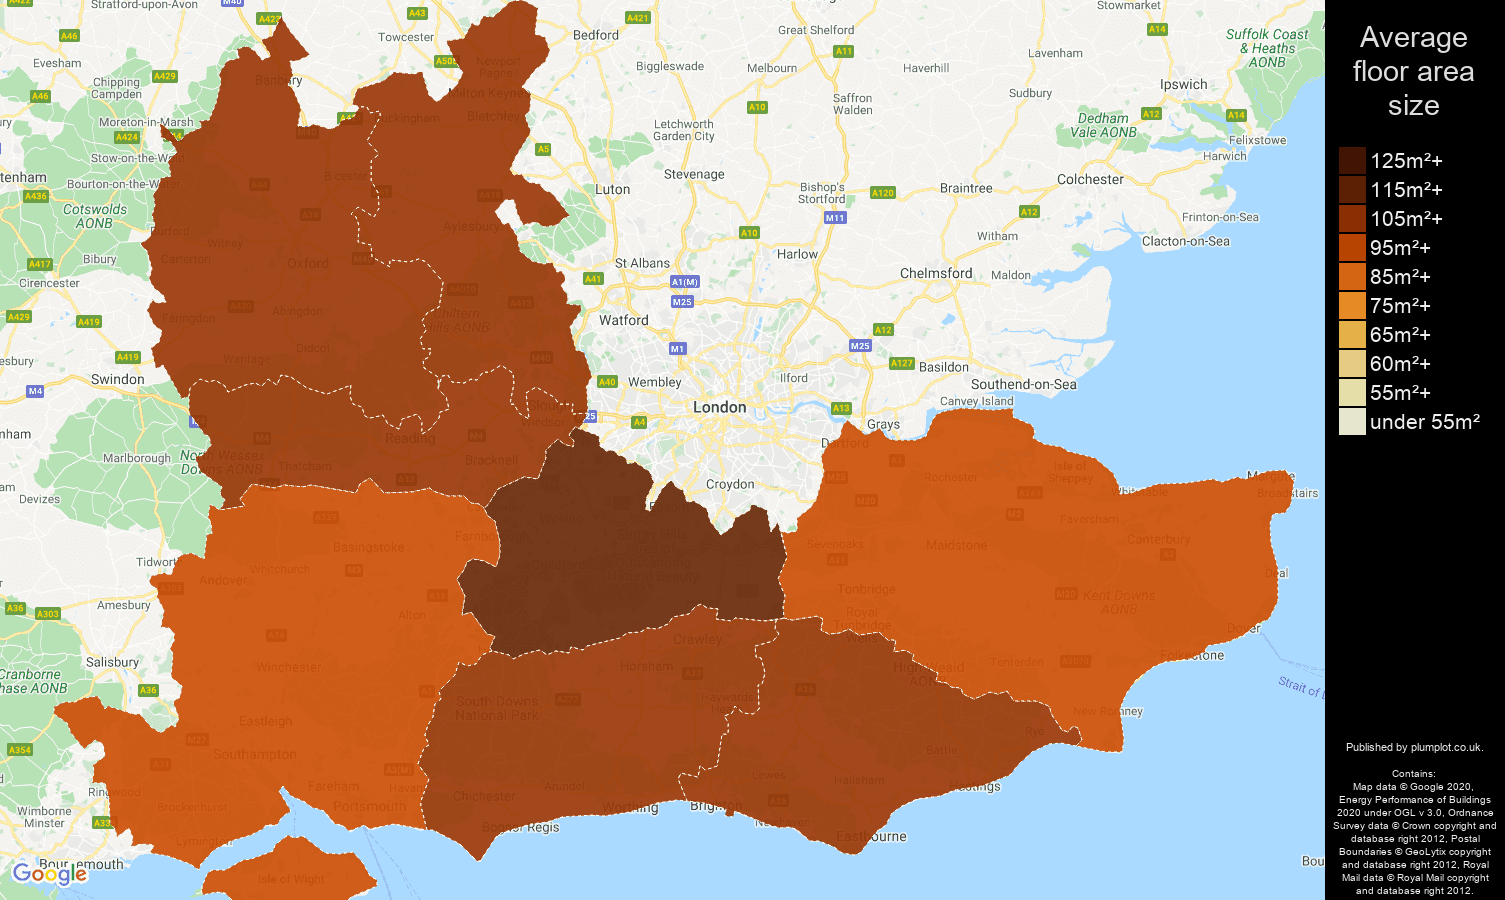 South East map of average floor area size of houses